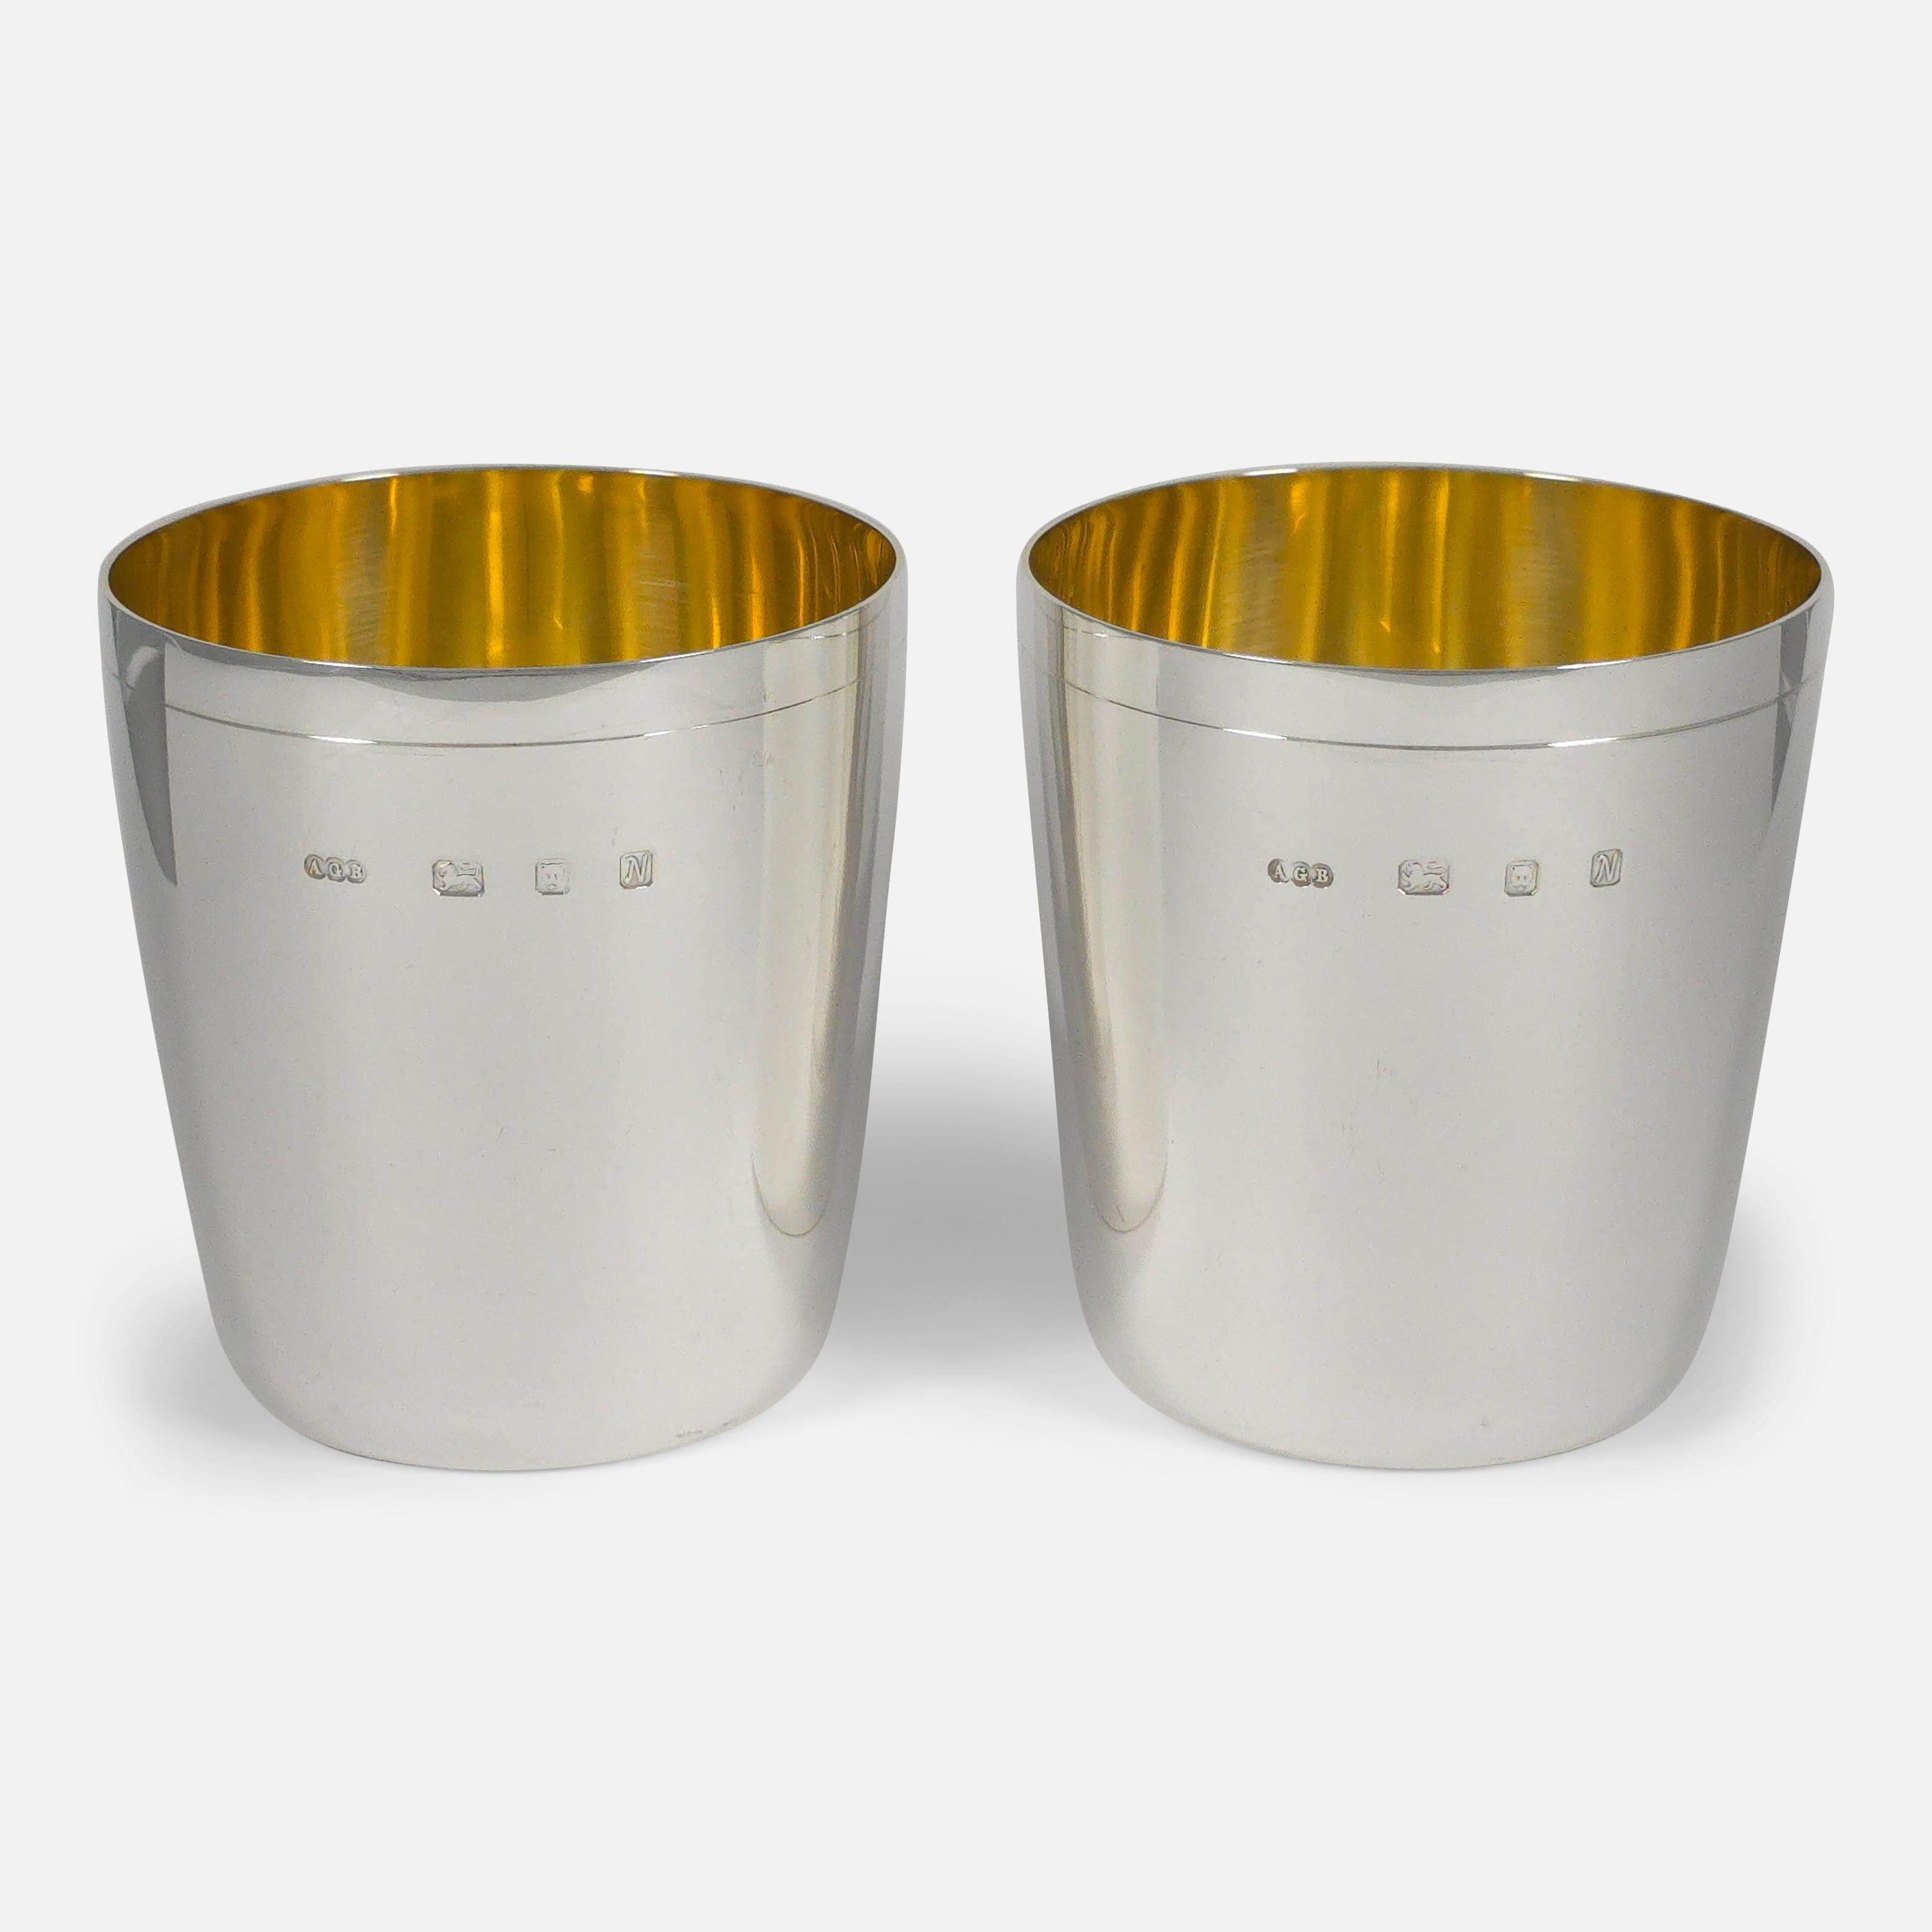 1987 sterling silver beakers by Gerald Benney, featuring tapering circular forms with single line decoration and gilded bowls. The beakers come in the original box, including a personal note from Gerald Benney dated 23 Feb 1989.

• Assay: .925